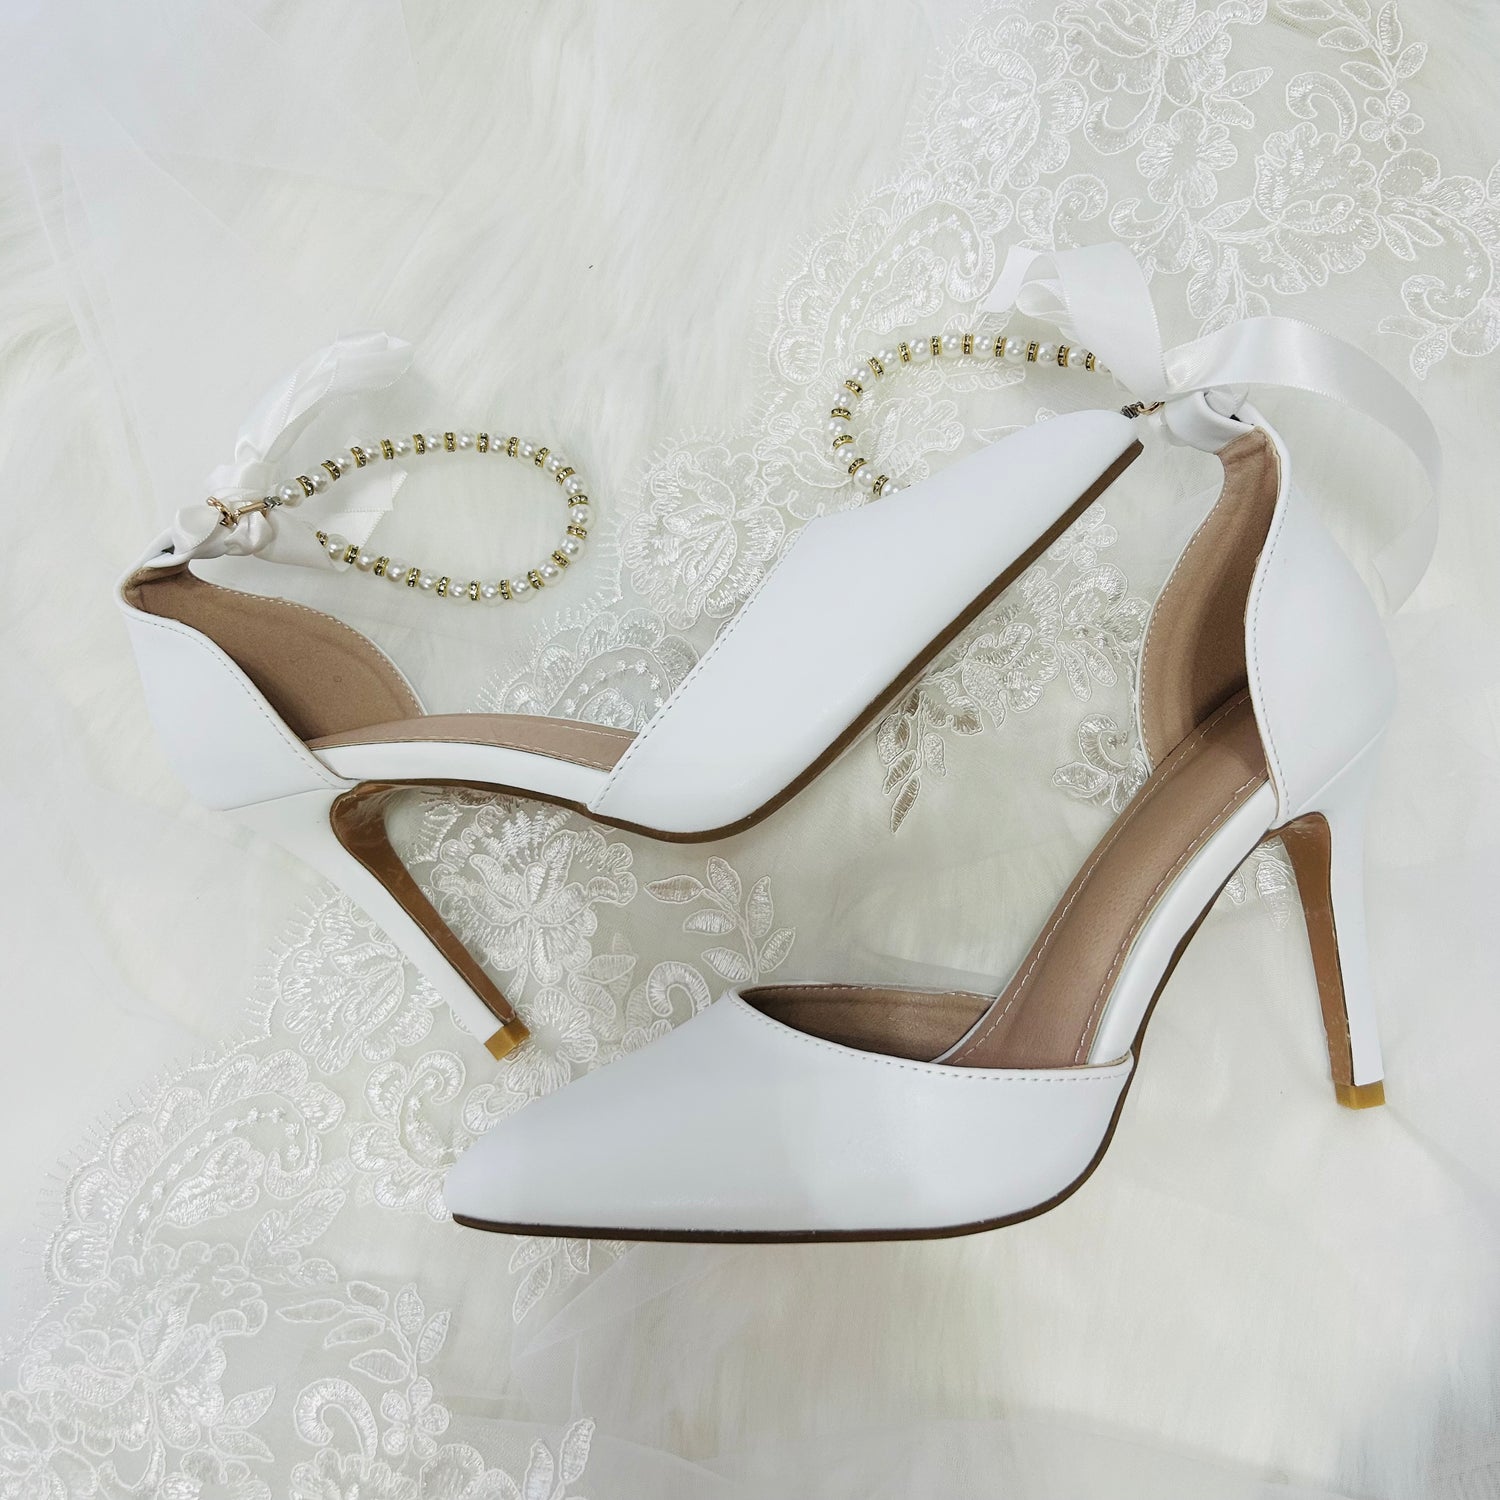 betsy-wedding-shoes